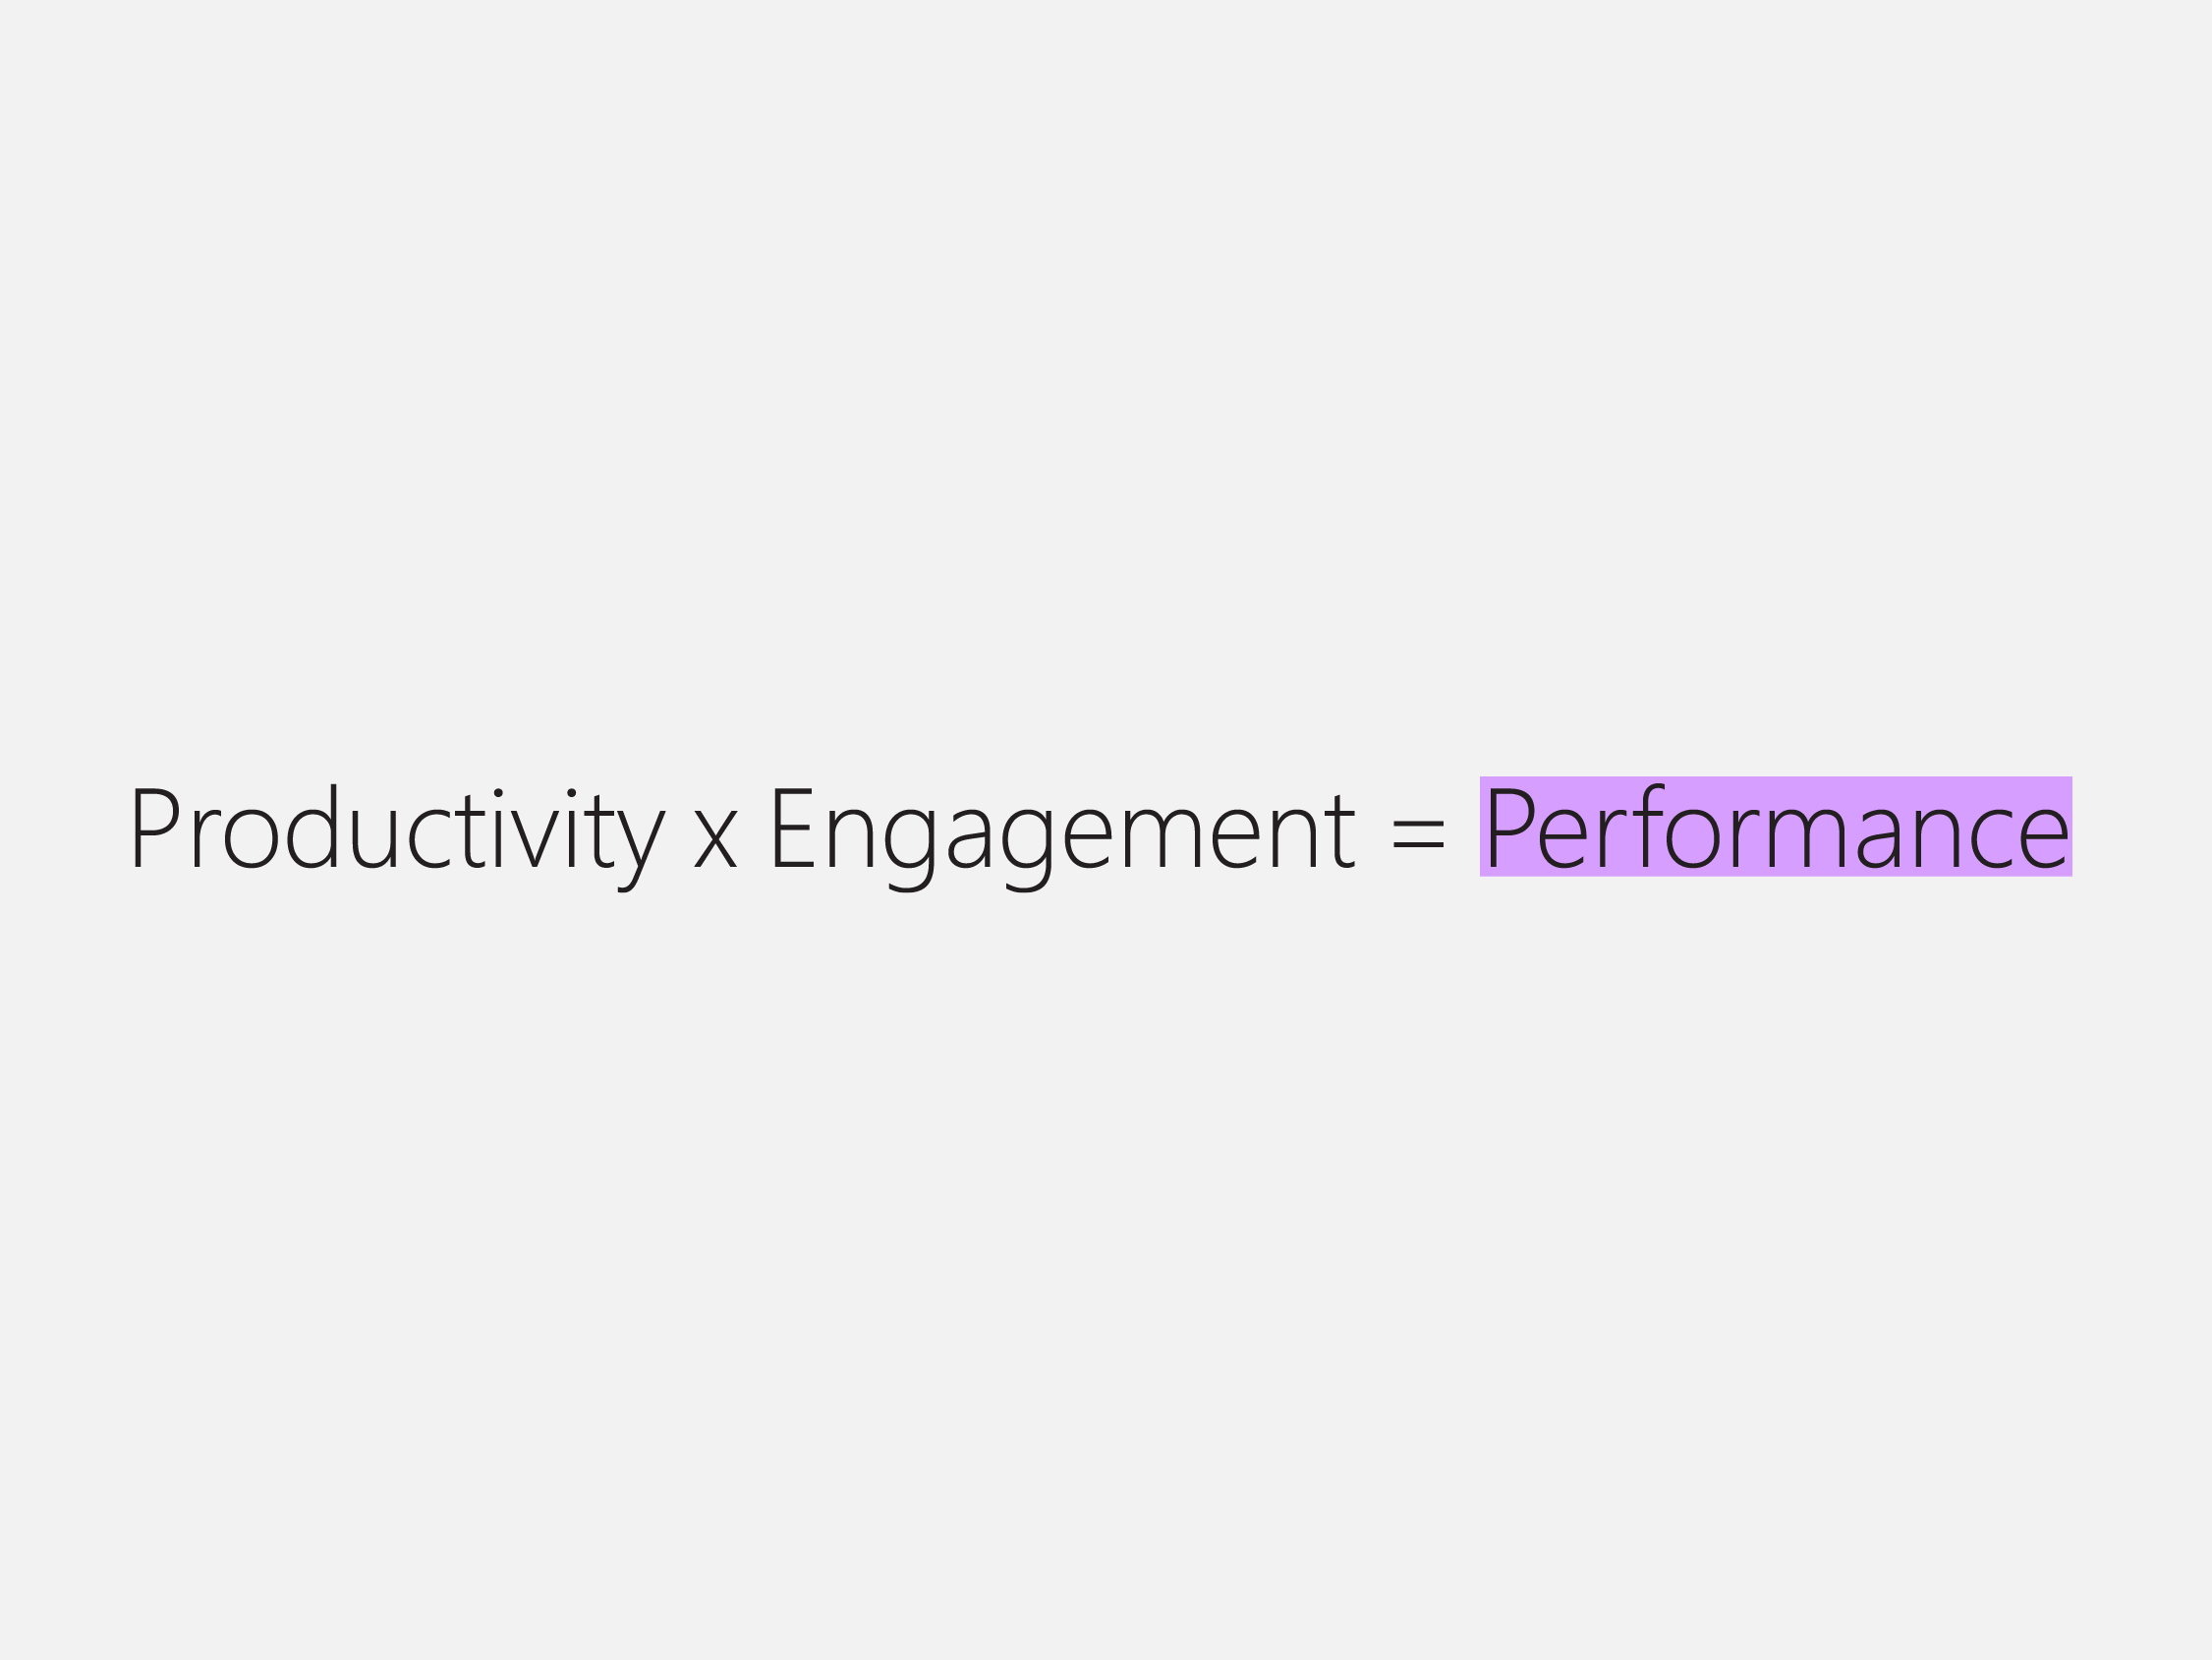 A diagram that depicts the multiplication of 'Productivity' and 'Engagement', which equates to 'Performance'